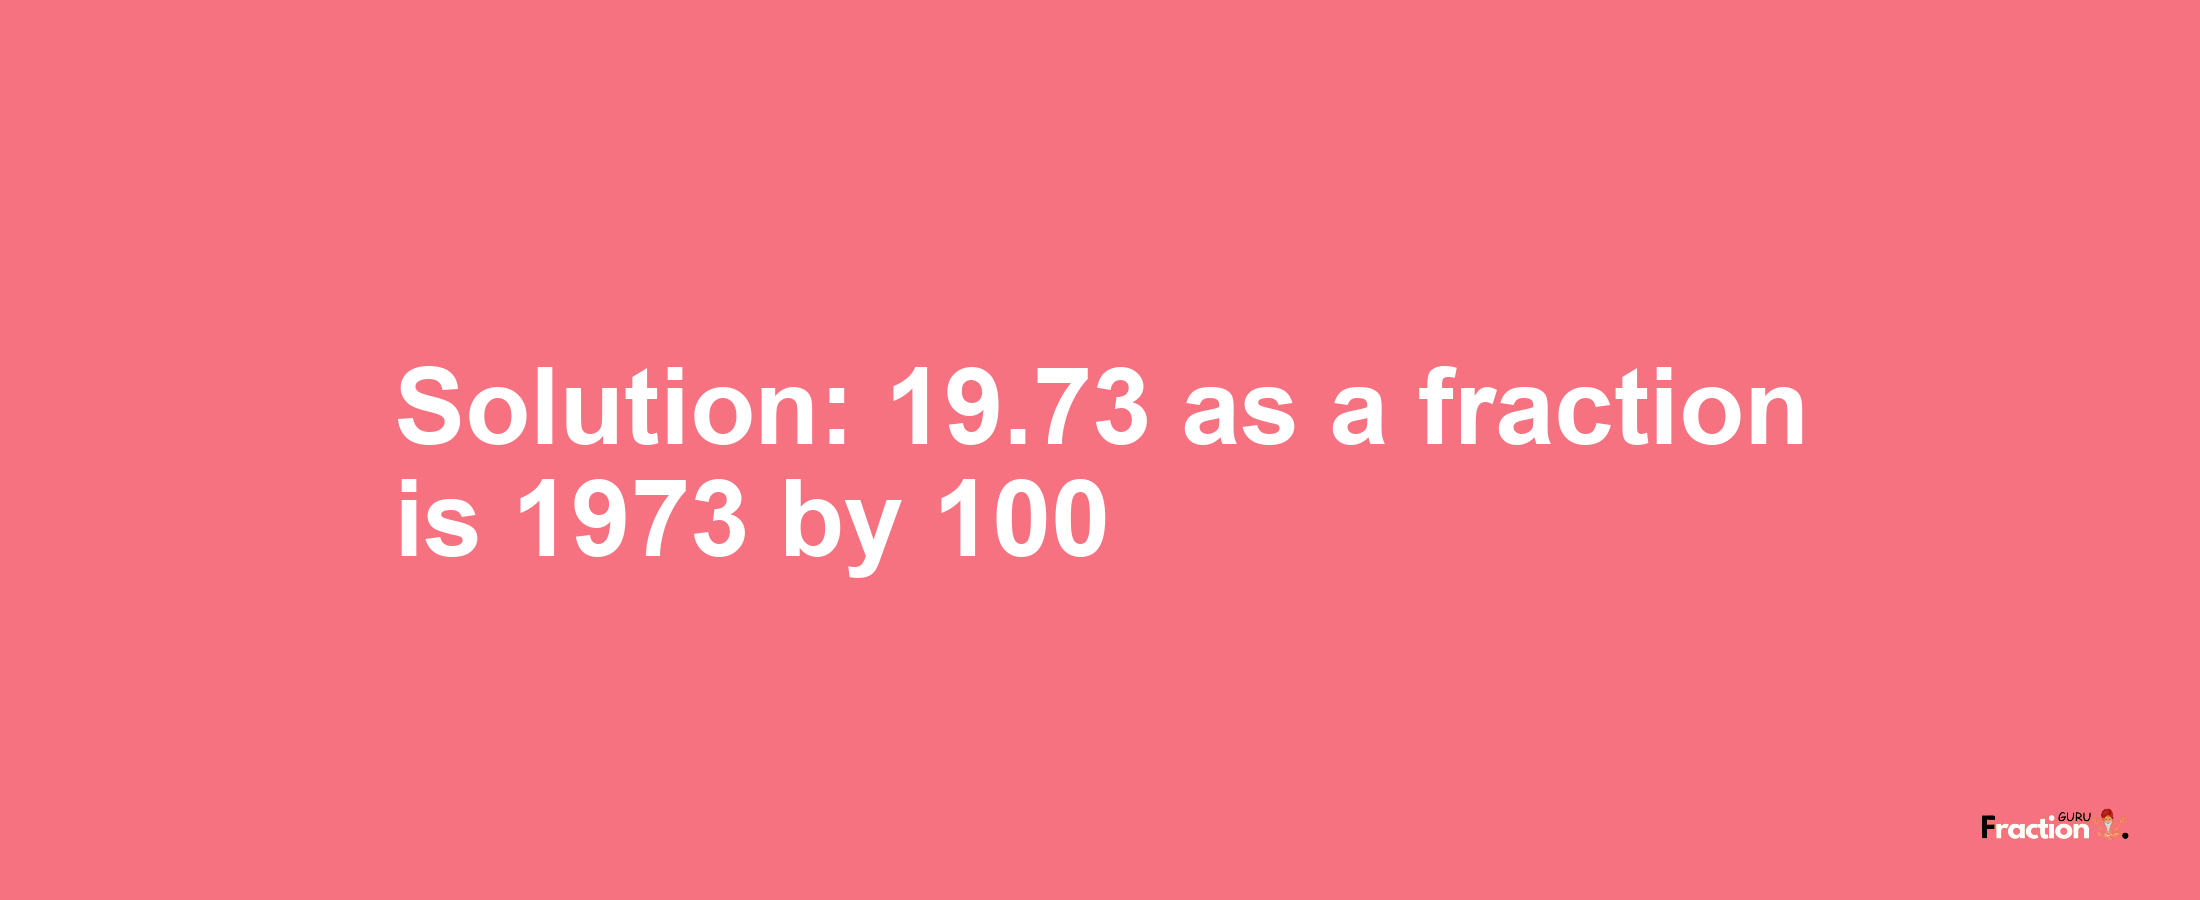 Solution:19.73 as a fraction is 1973/100